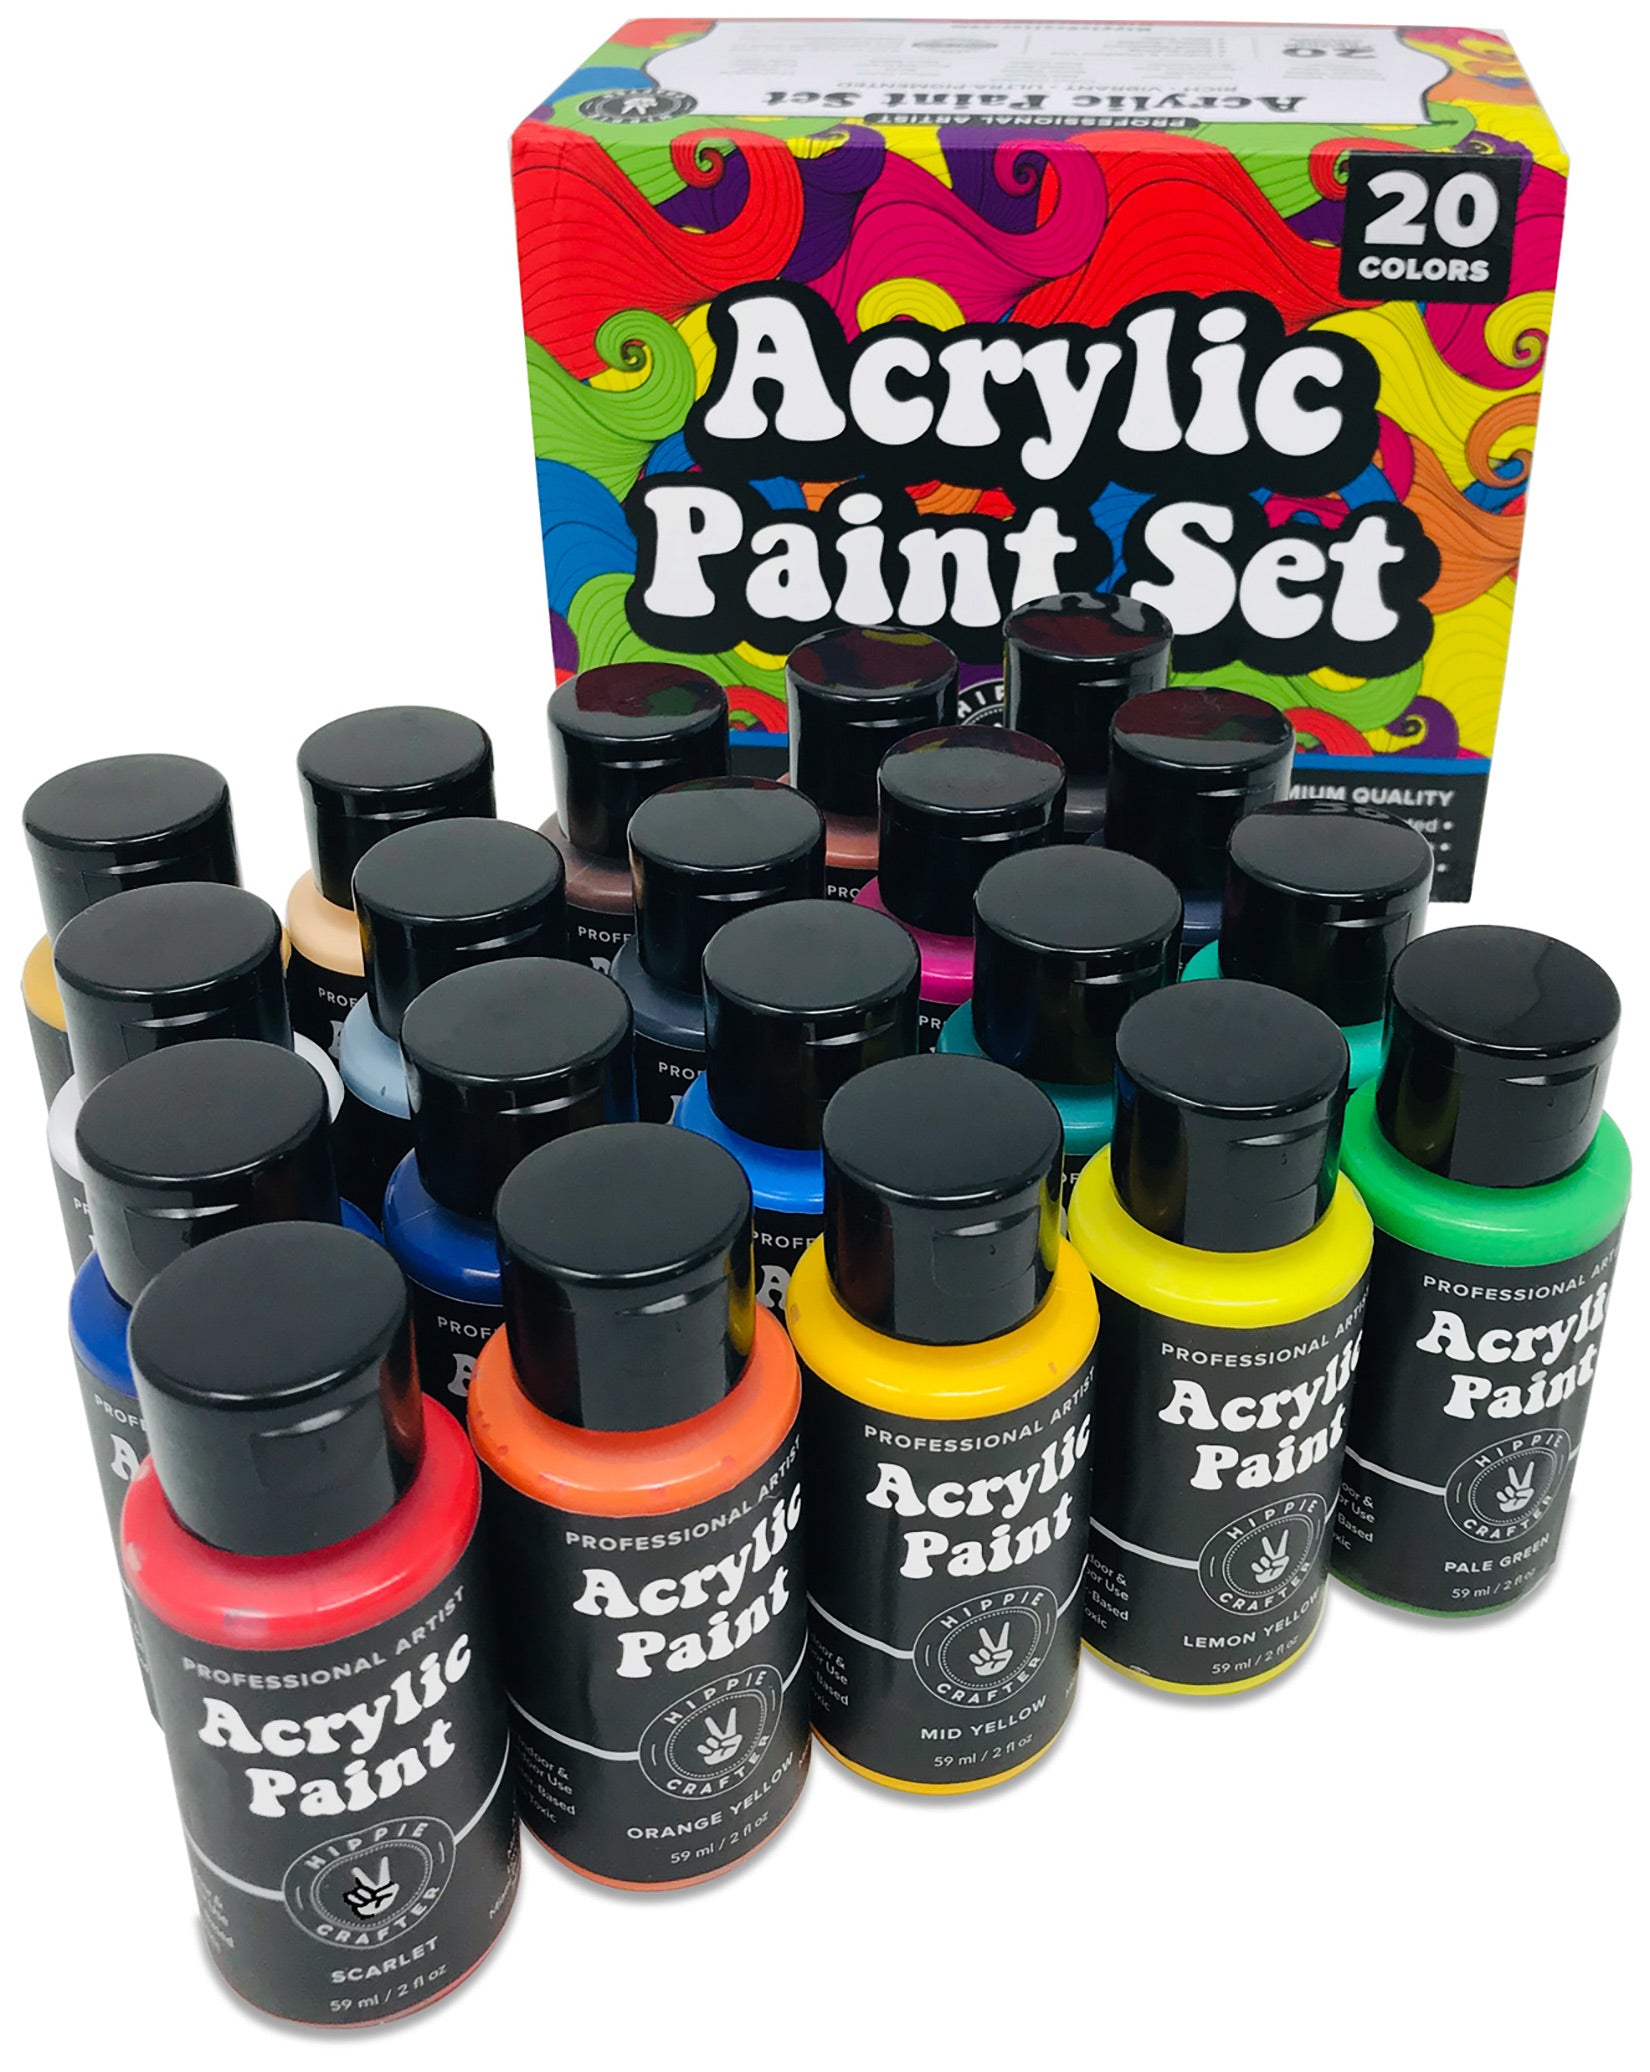 Acrylic Paint Set 8 Colors with 2 Canvases - Acrylic Paint Kit 2FL oz Bottles, Rich Pigmented, Matte Finish and Smooth Application Professional